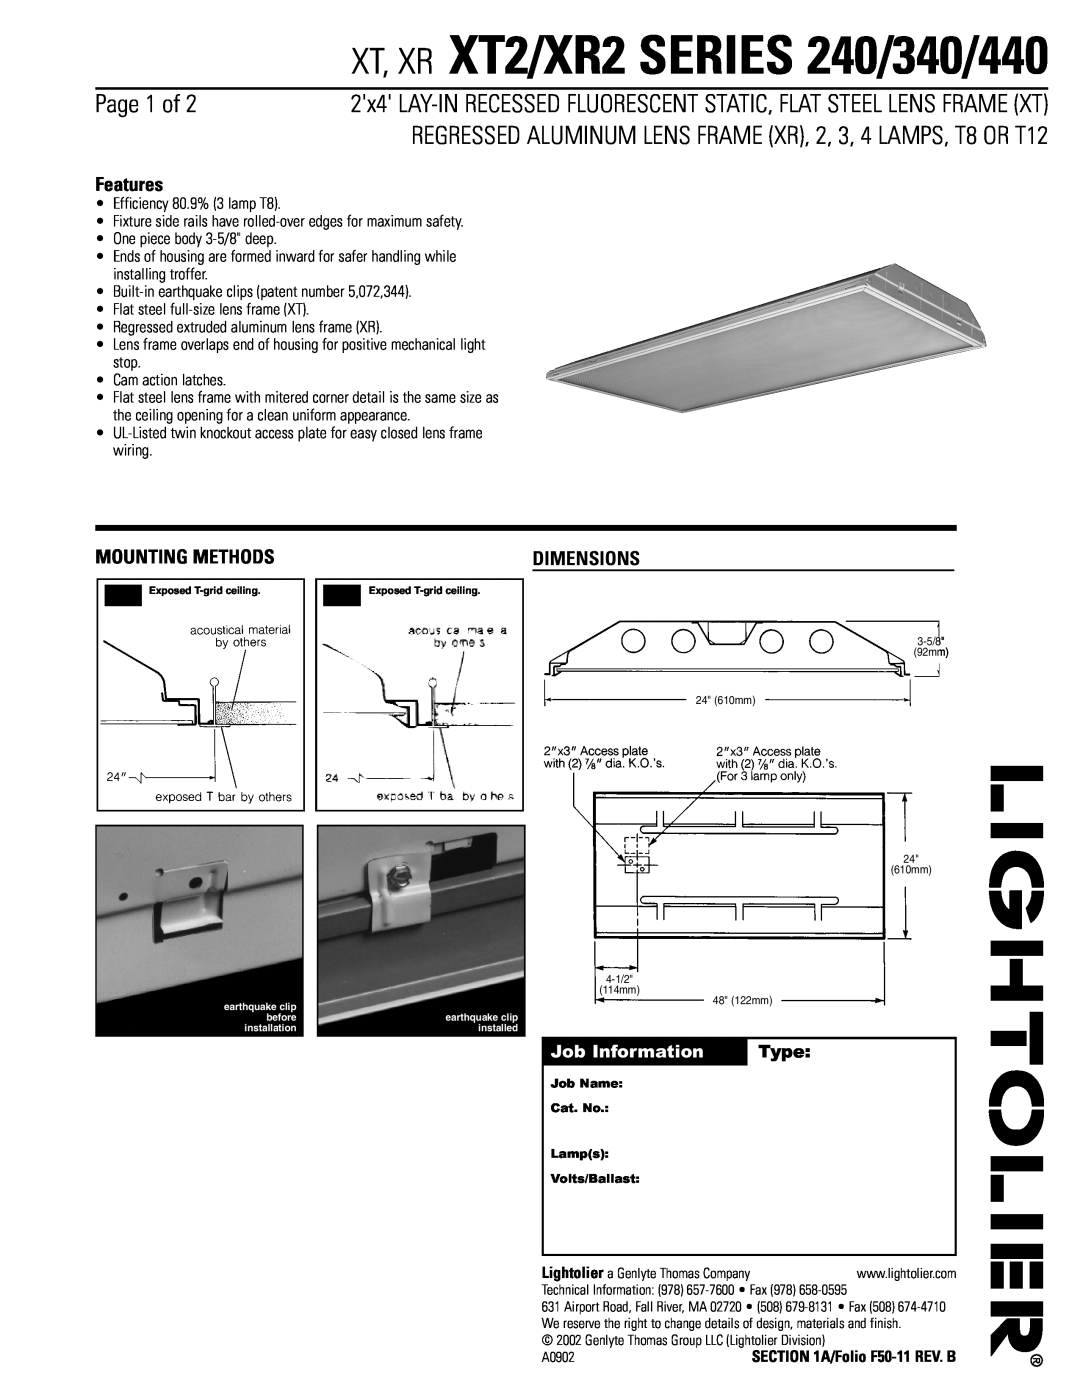 Lightolier dimensions XT, XR XT2/XR2 SERIES 240/340/440, Page 1 of, Features, Mounting Methods, Dimensions, Type 